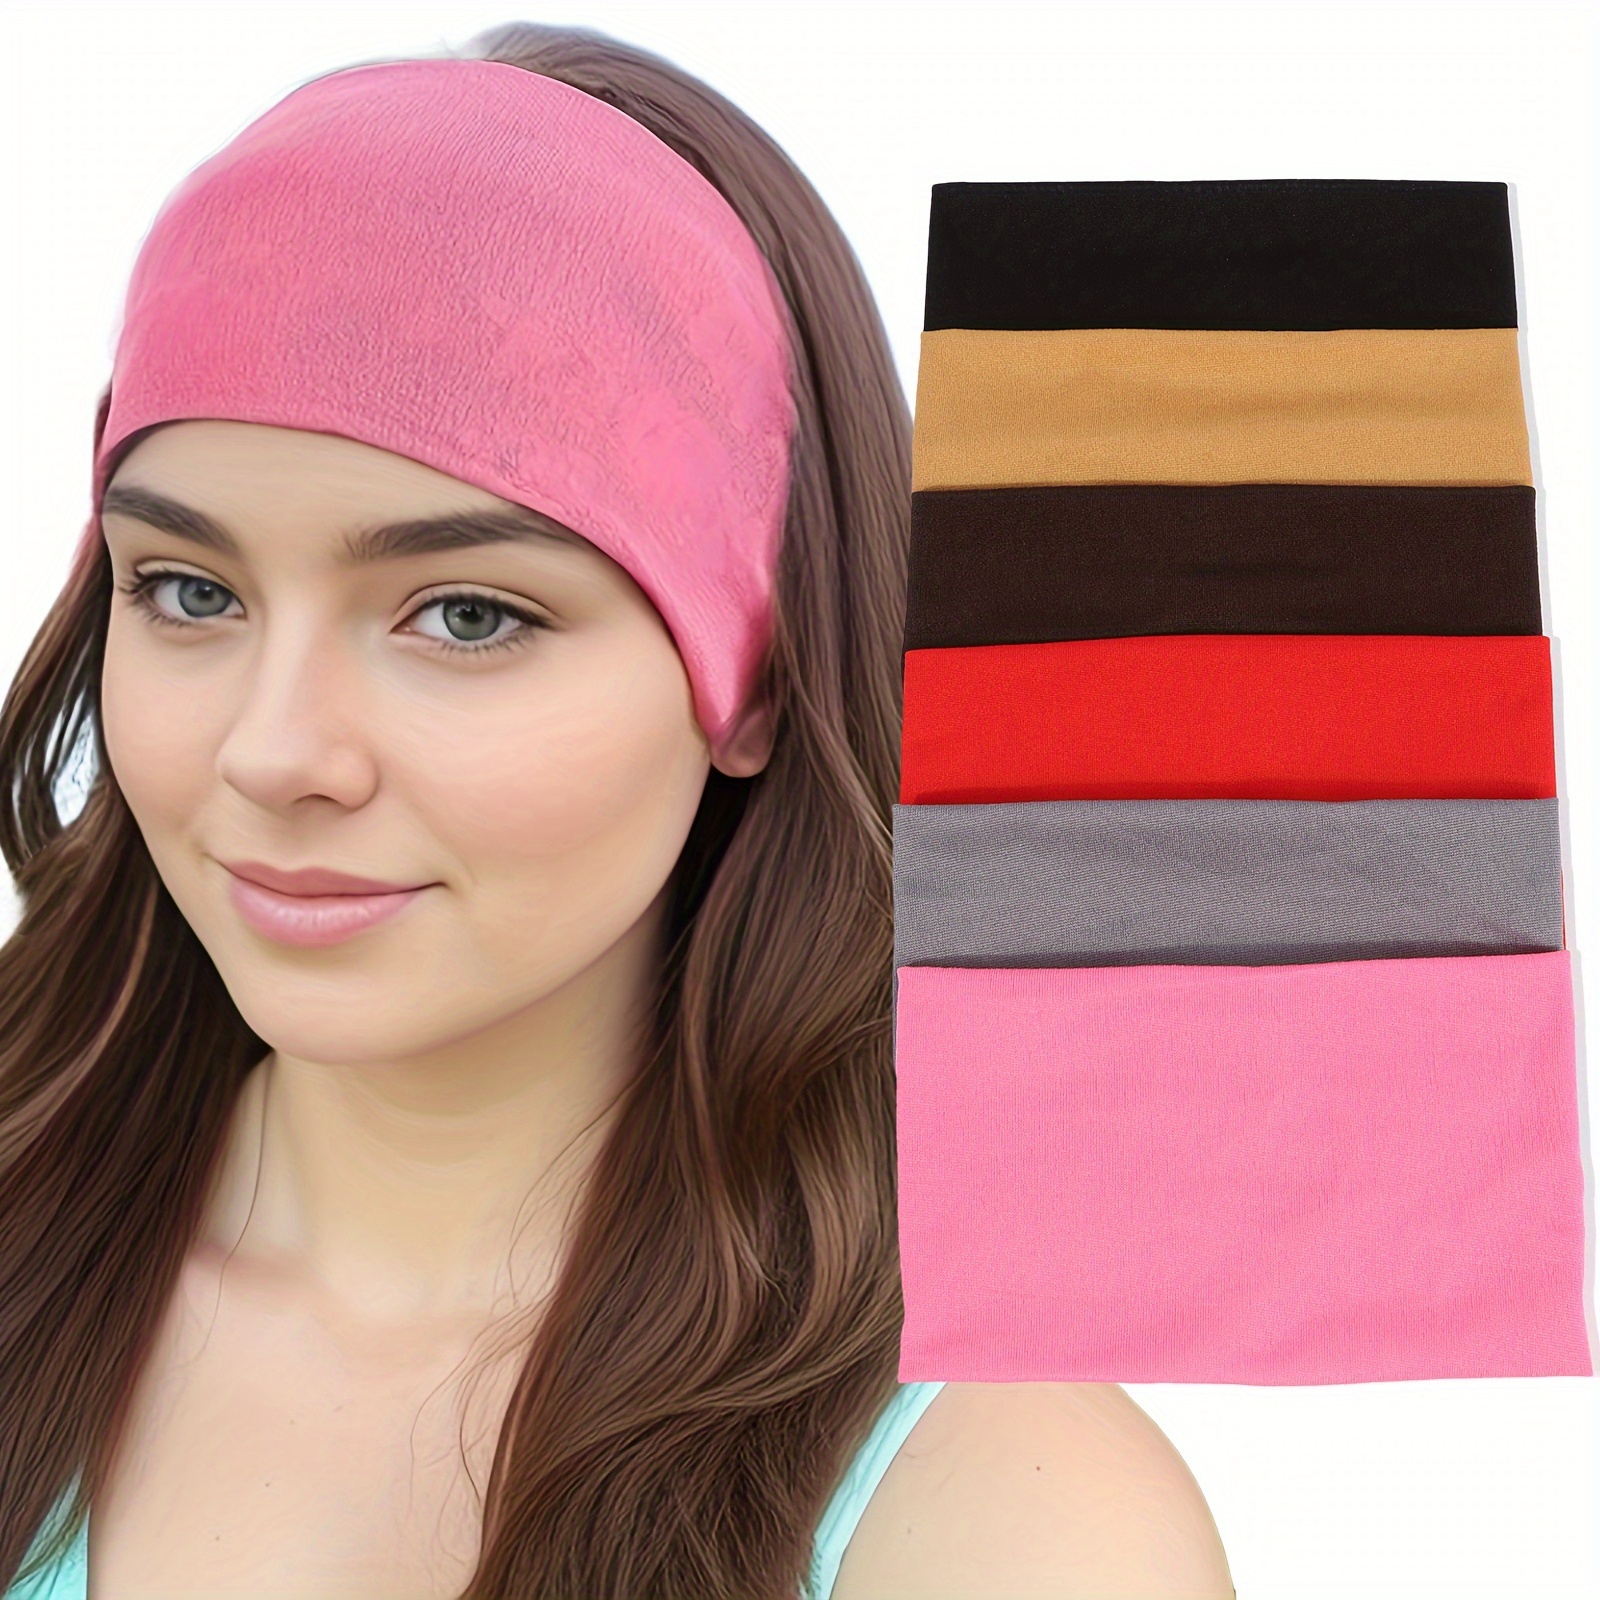 

3 Pcs Solid Color Wide Headbands For Women Stylish Head Wraps Sport Yoga Hairbands Turban Hair Accessories